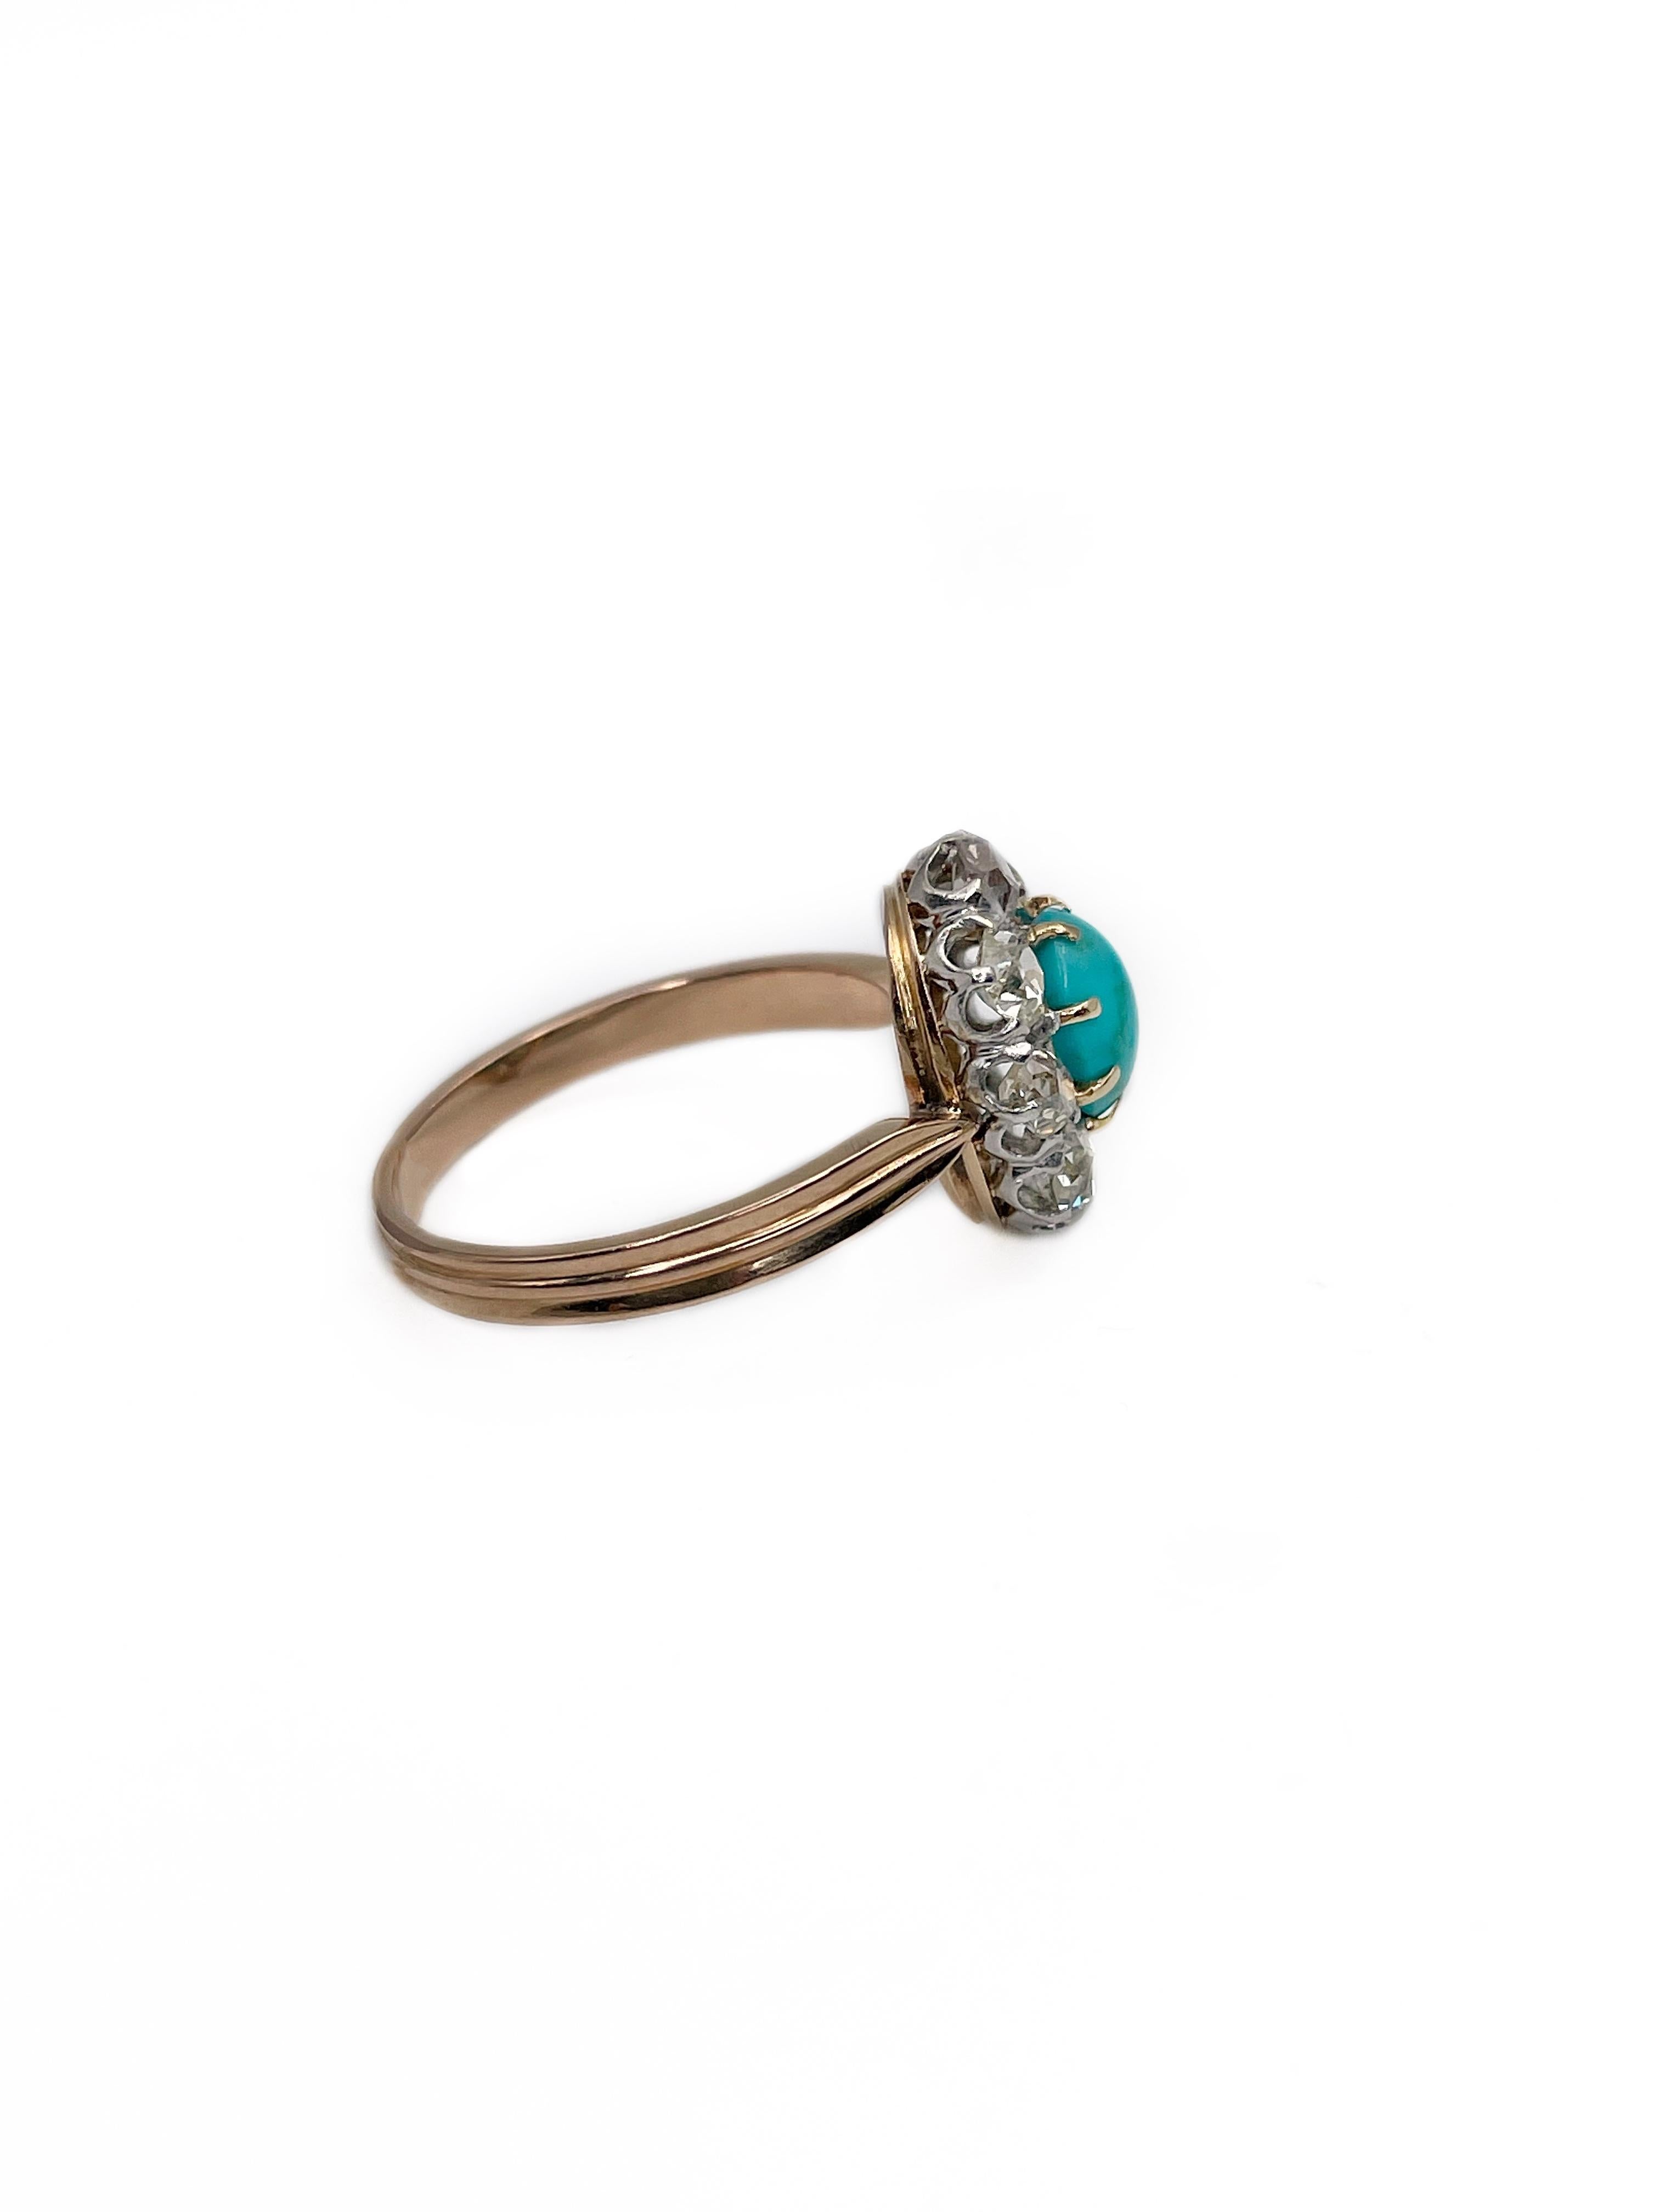 antique turquoise engagement rings